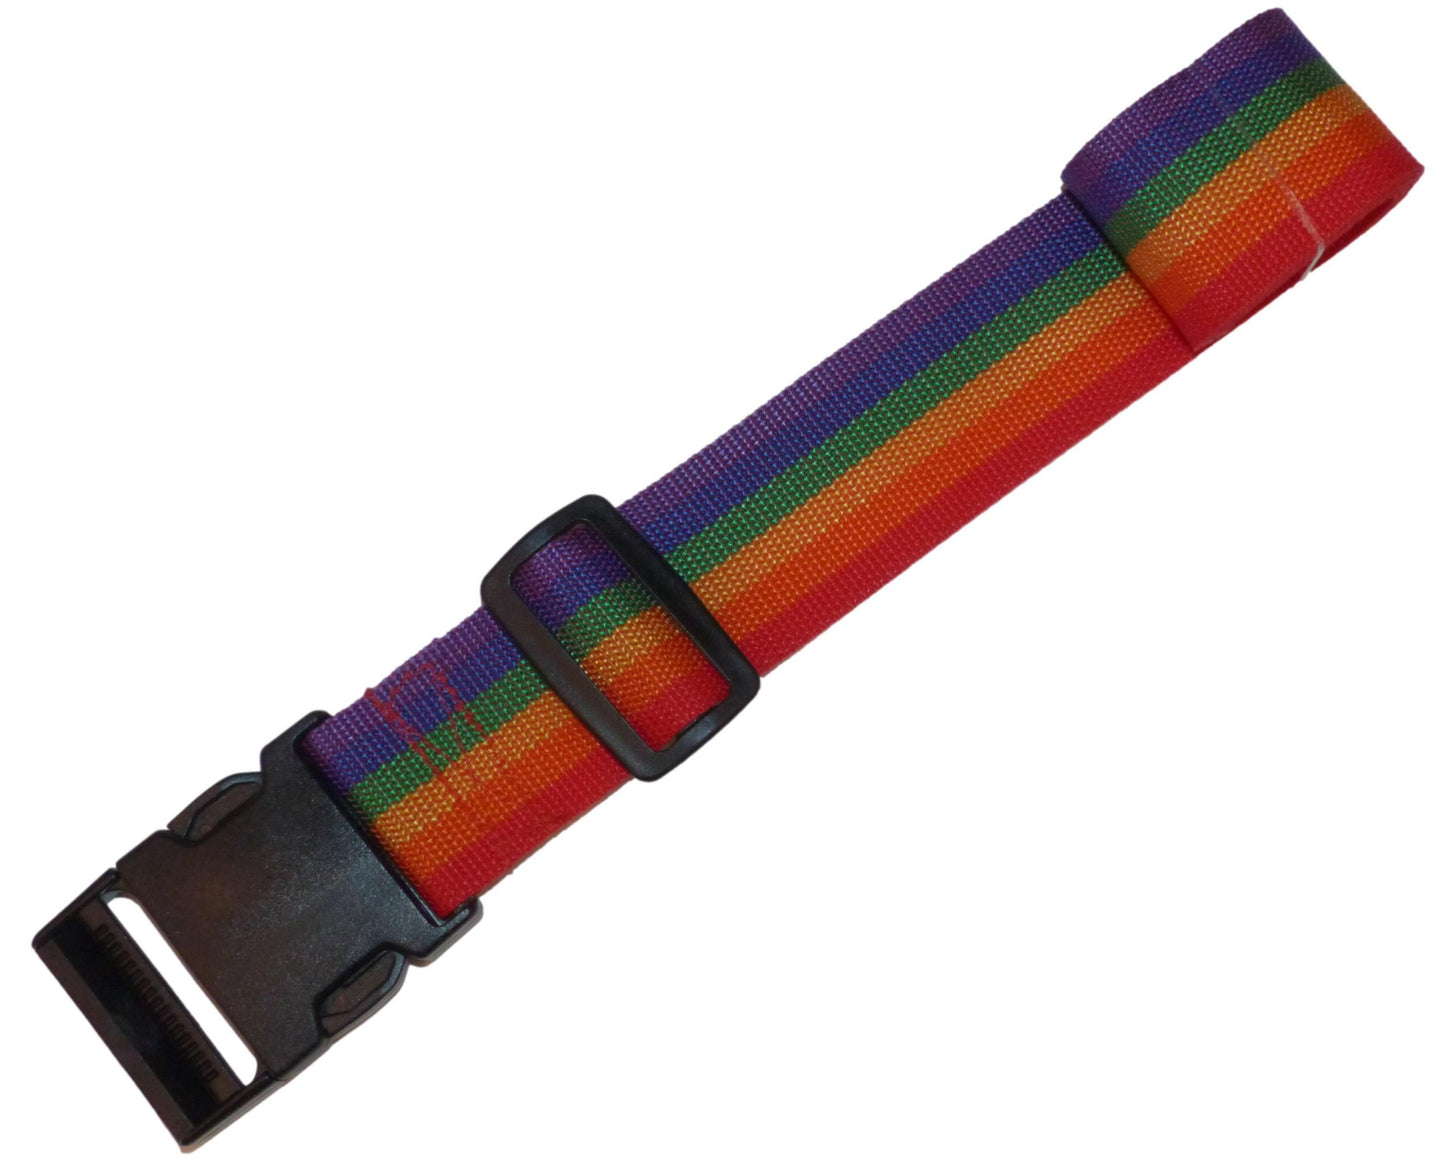 Benristraps 50mm Webbing Strap with Quick Release Buckle in rainbow